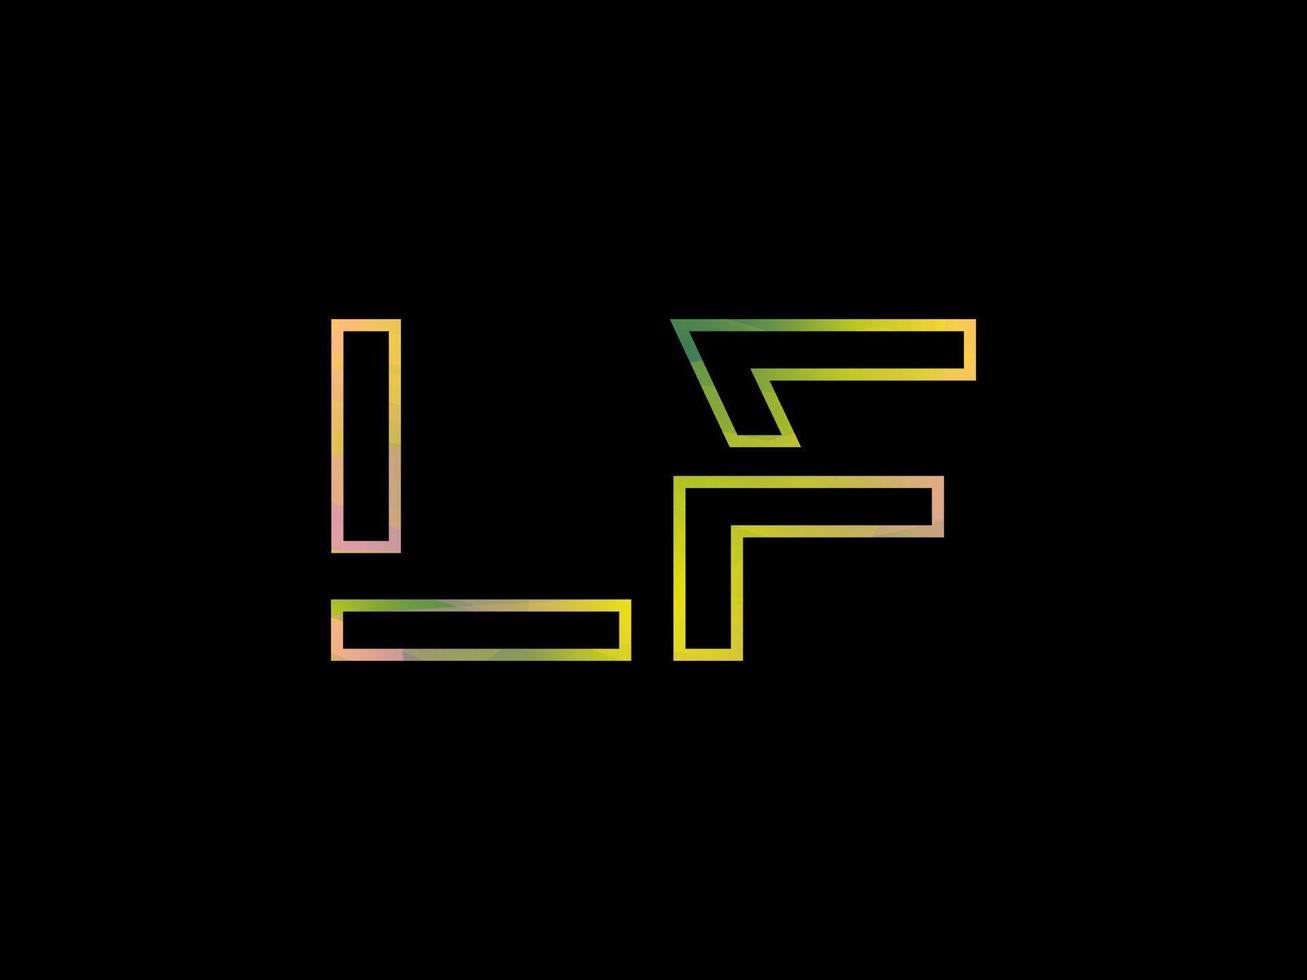 LF Letter Logo With Colorful Rainbow Texture Vector. Pro vector. vector